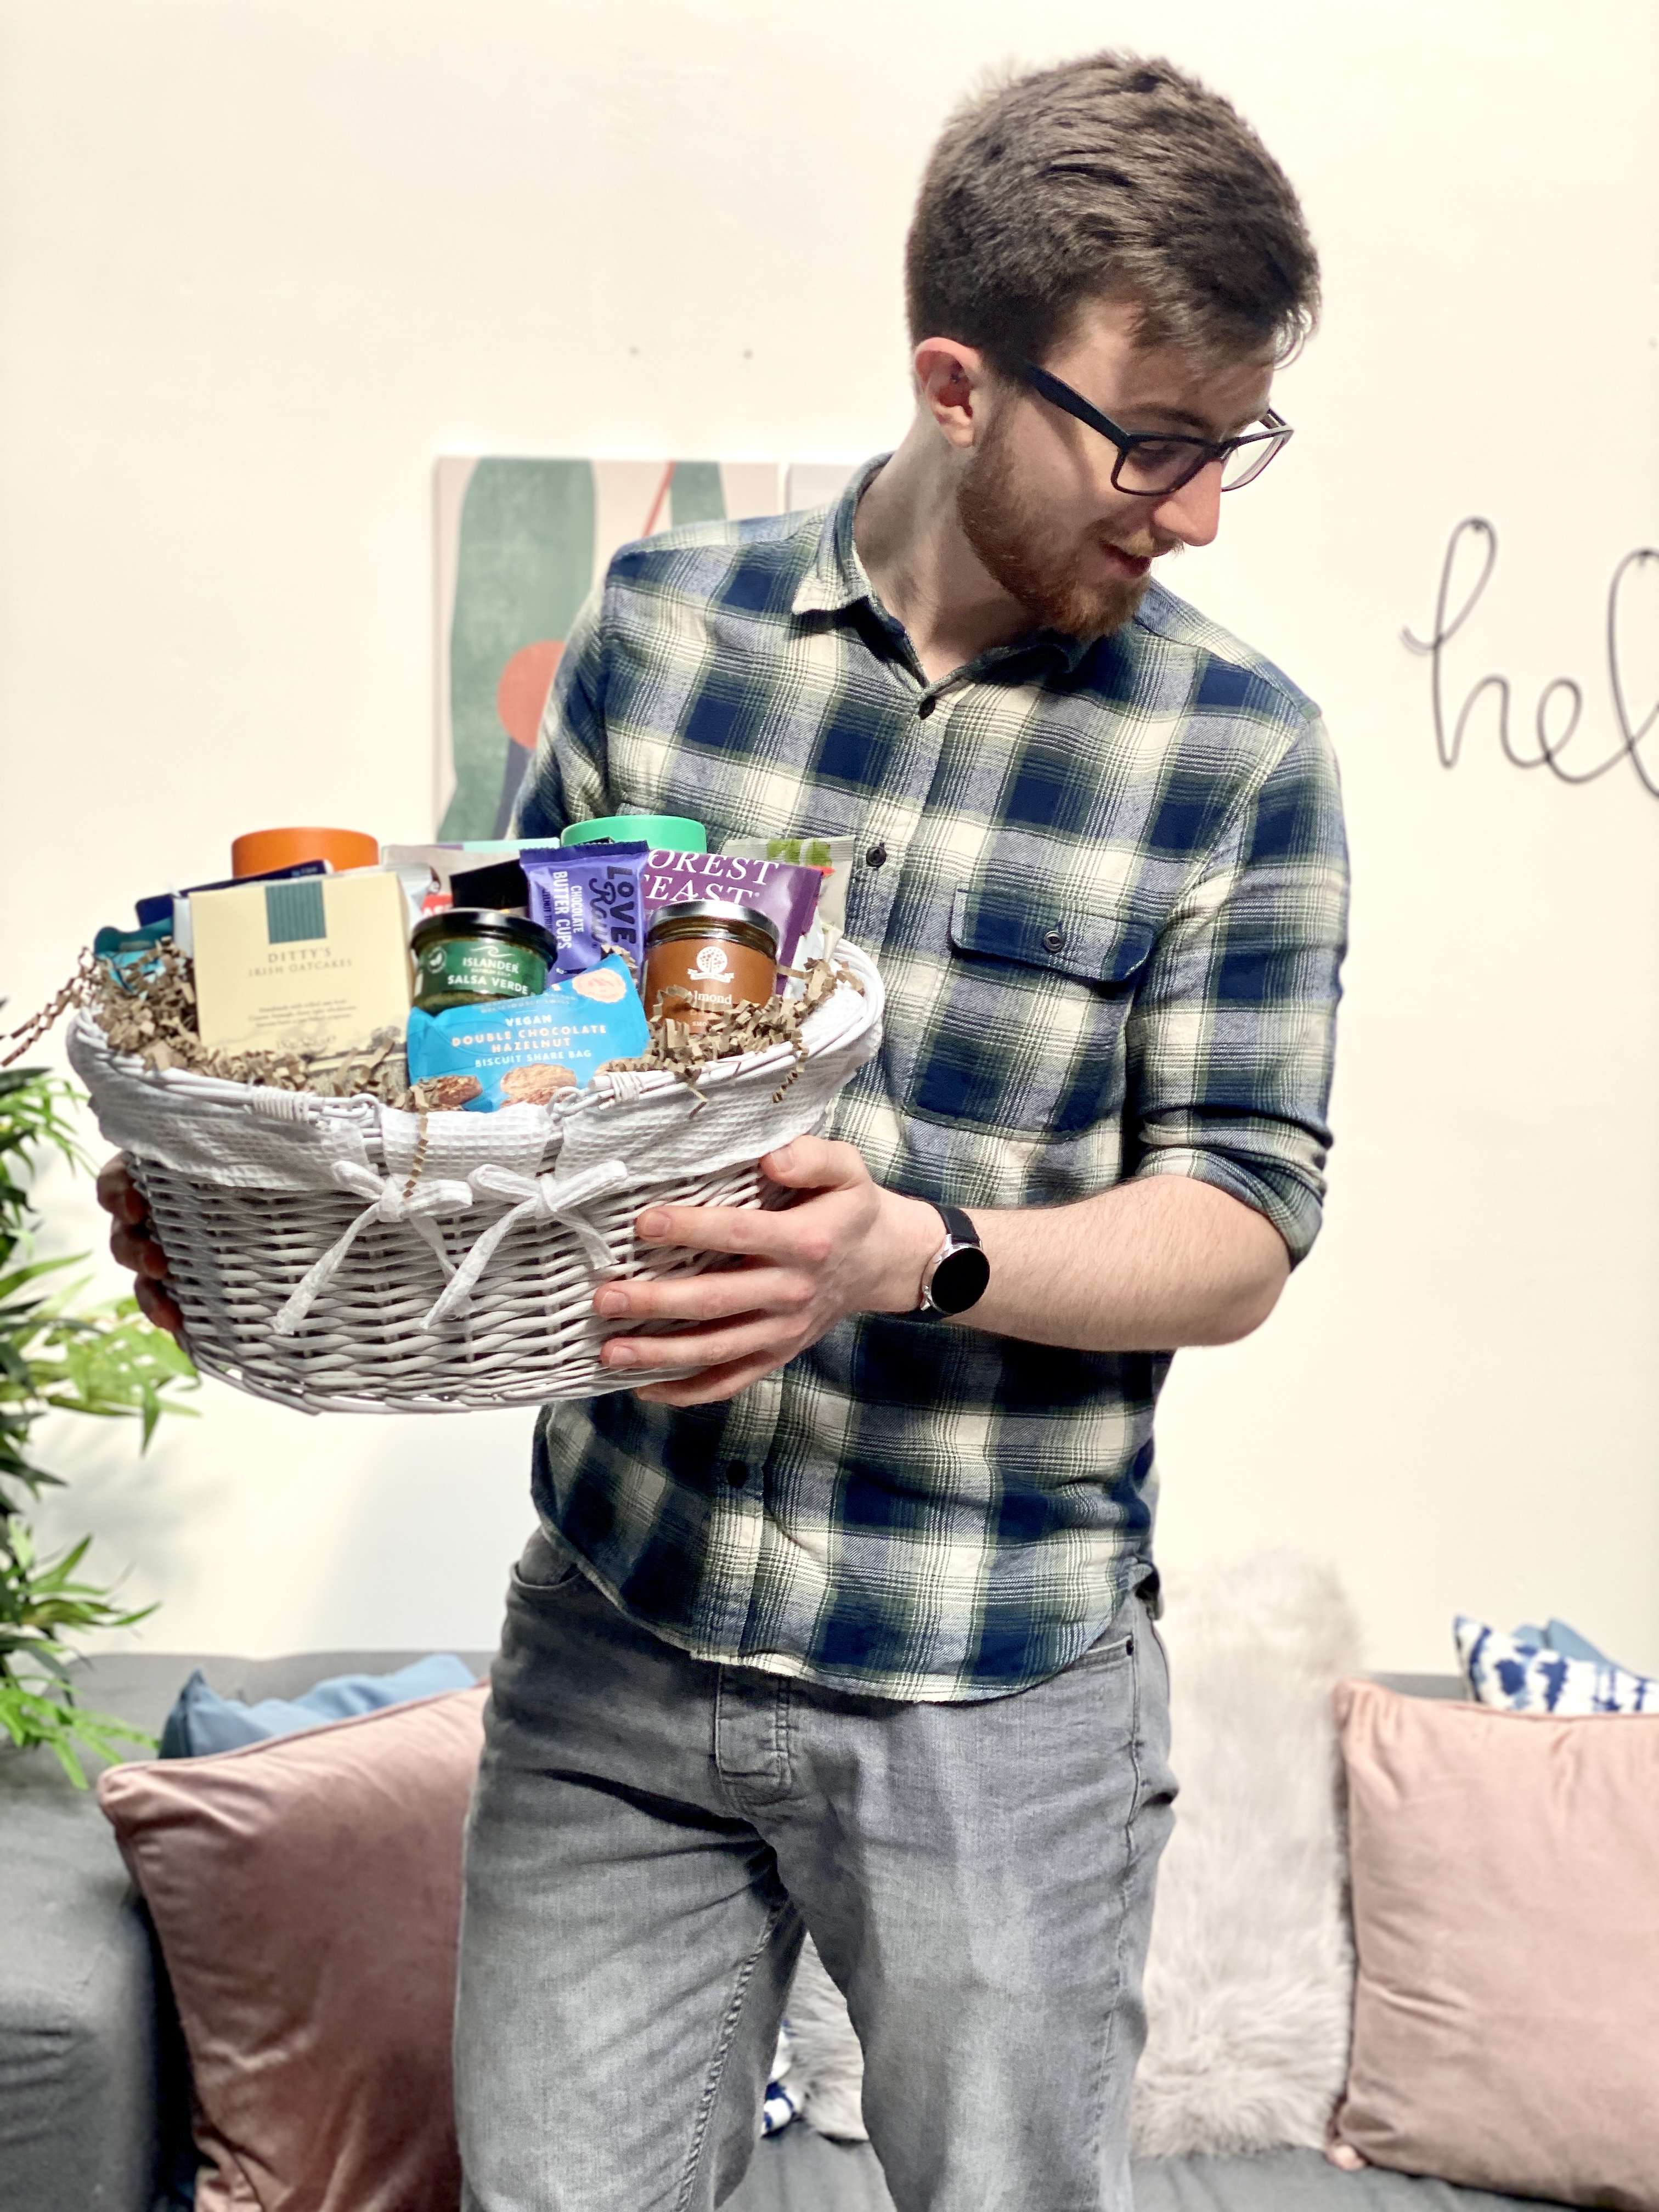 Holding a gift basket